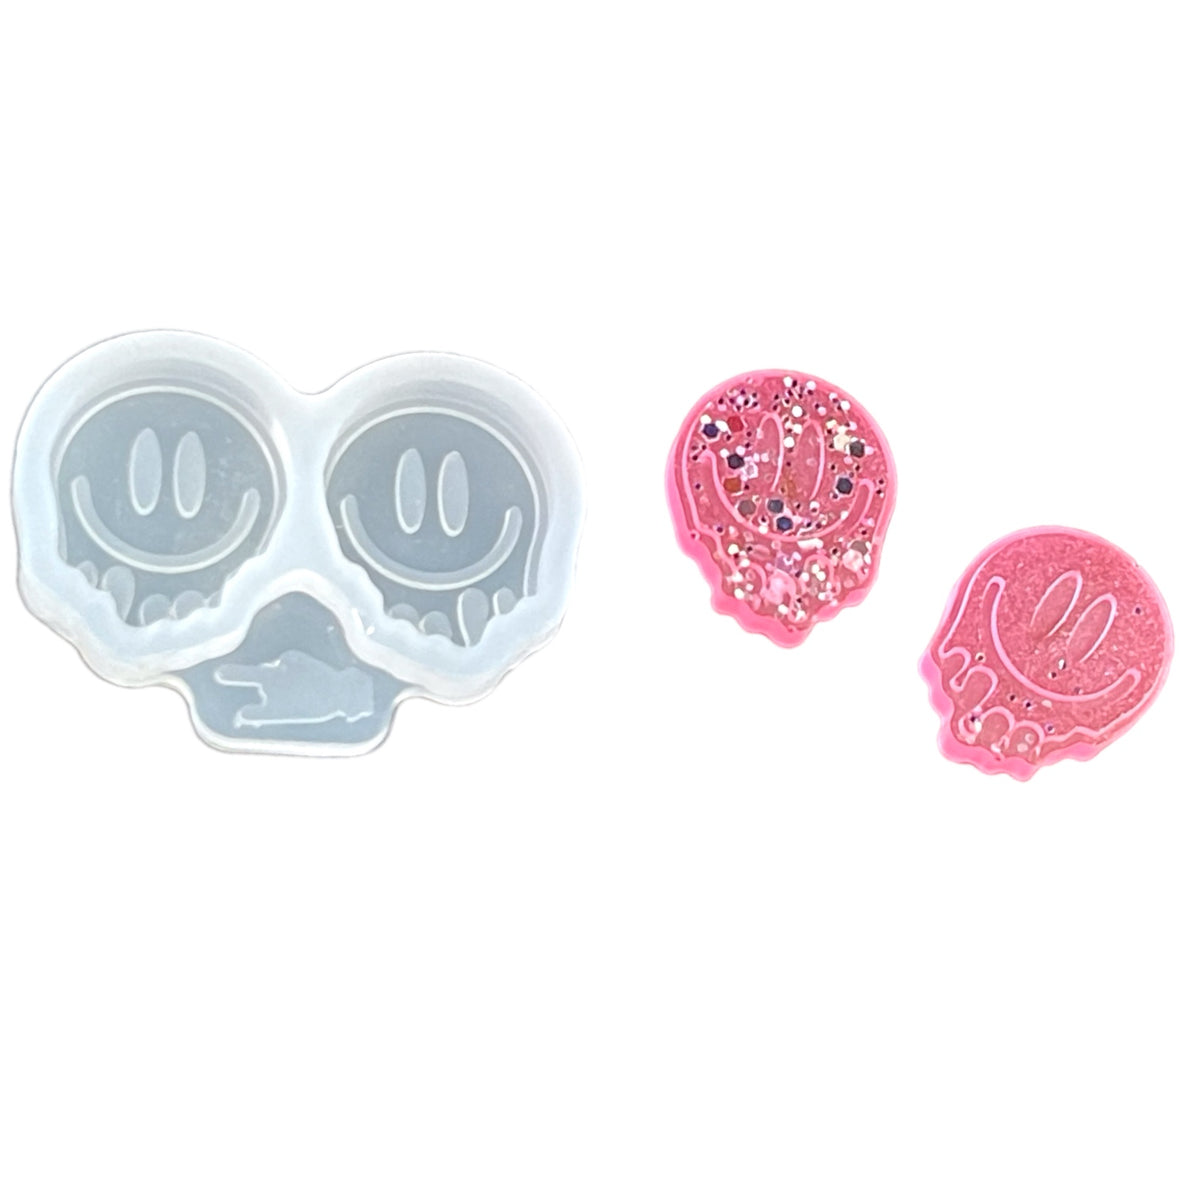 Drippy Smiley Resin Rockers Exclusive Stud Earring Mold for UV and Epoxy Resin